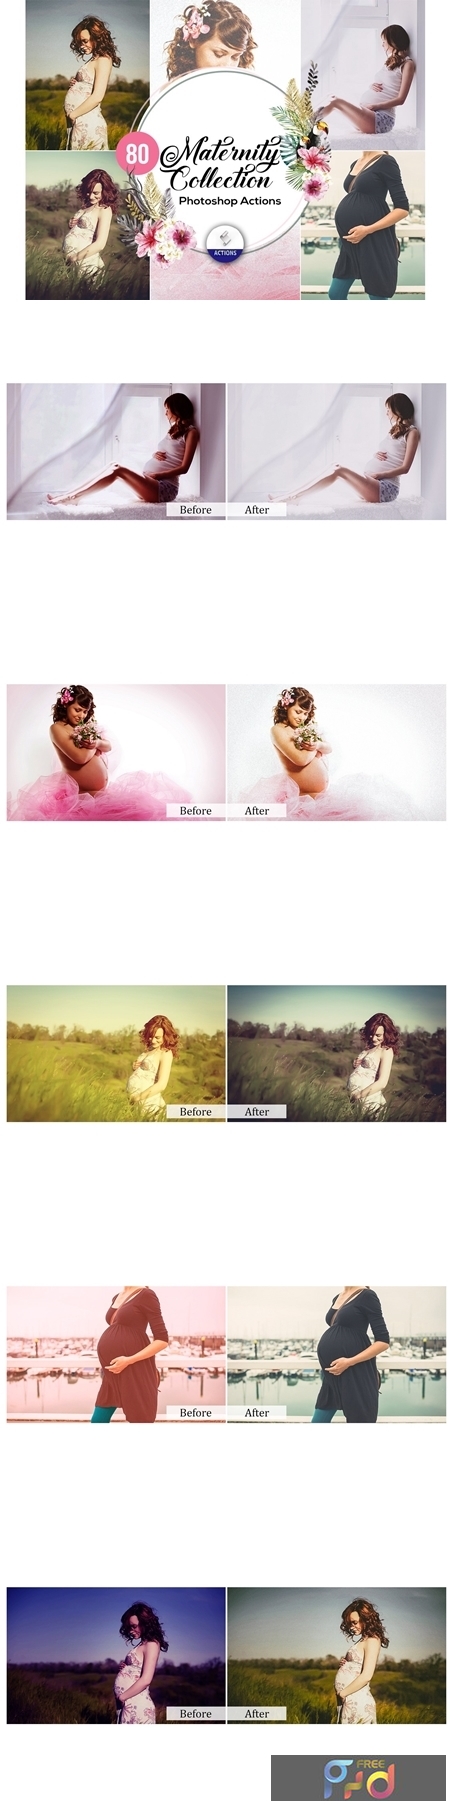 Maternity Photoshop Actions